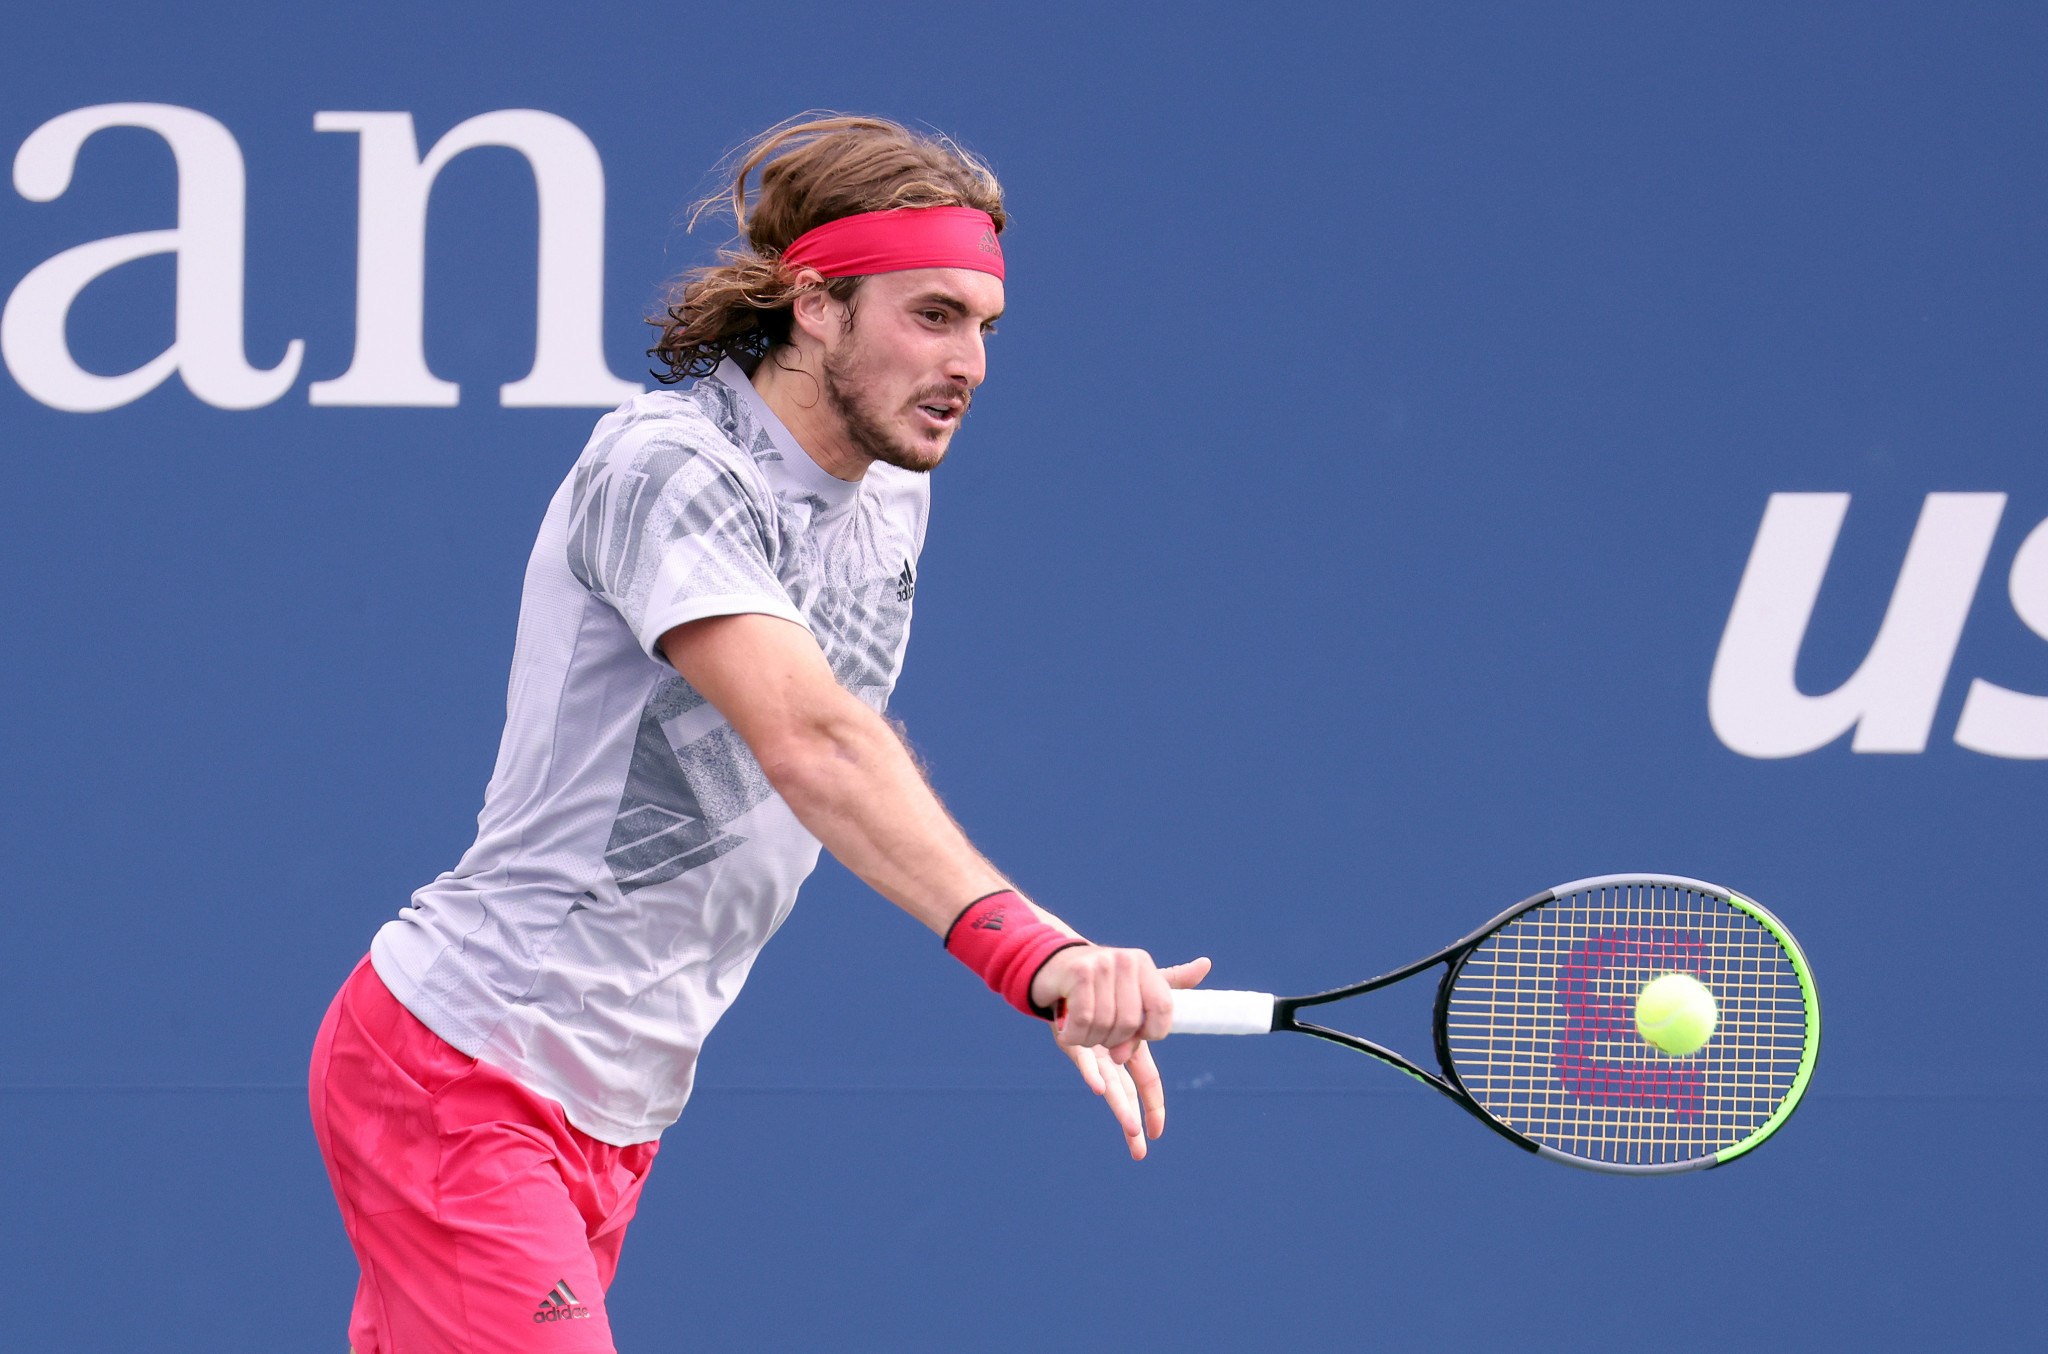 Men's fourth seed Stefanos Tsitsipas of Greece dropped just four games during his first-round win ©Getty Images